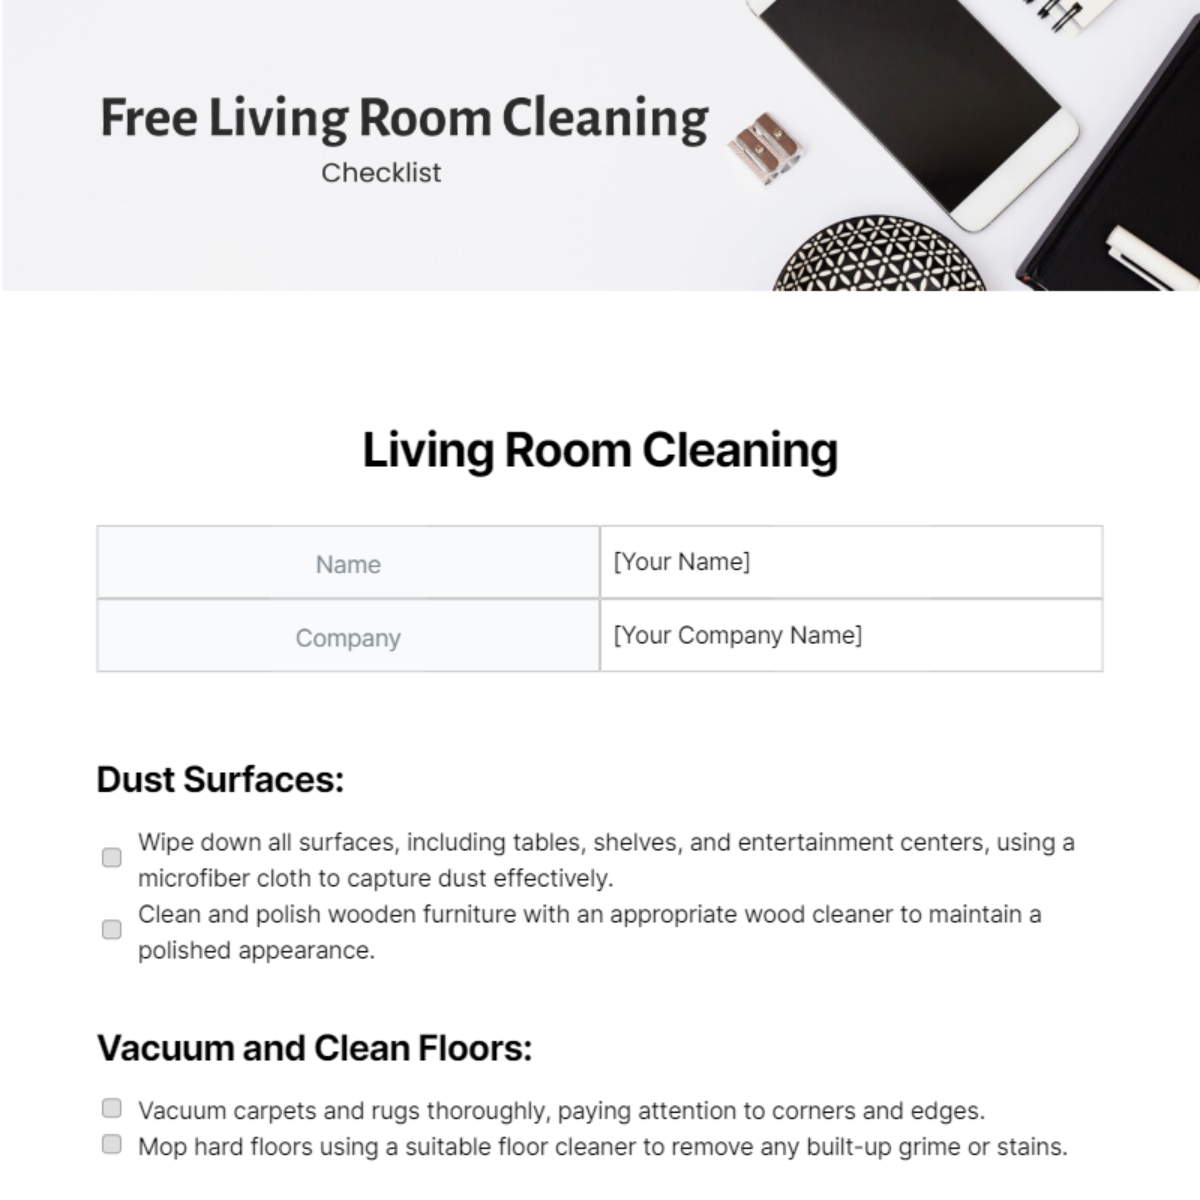 Free Living Room Cleaning Checklist Template